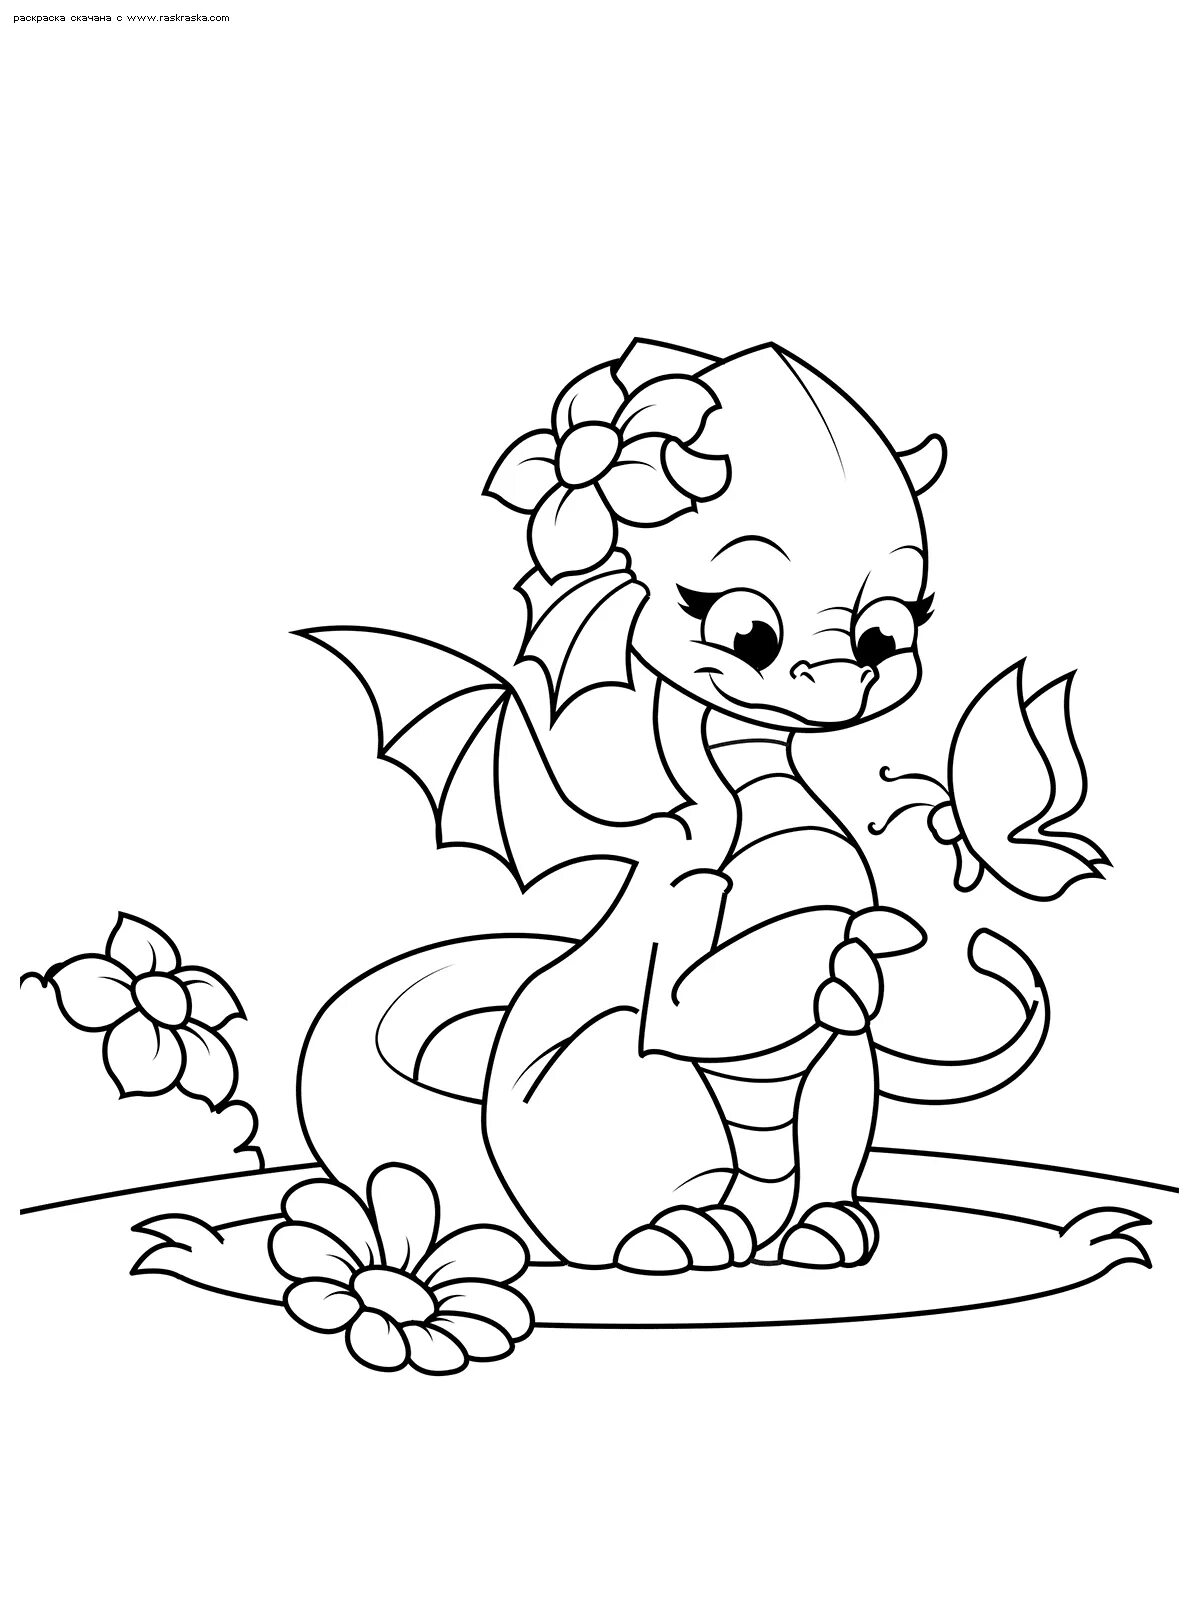 Outstanding dragon coloring pages for kids